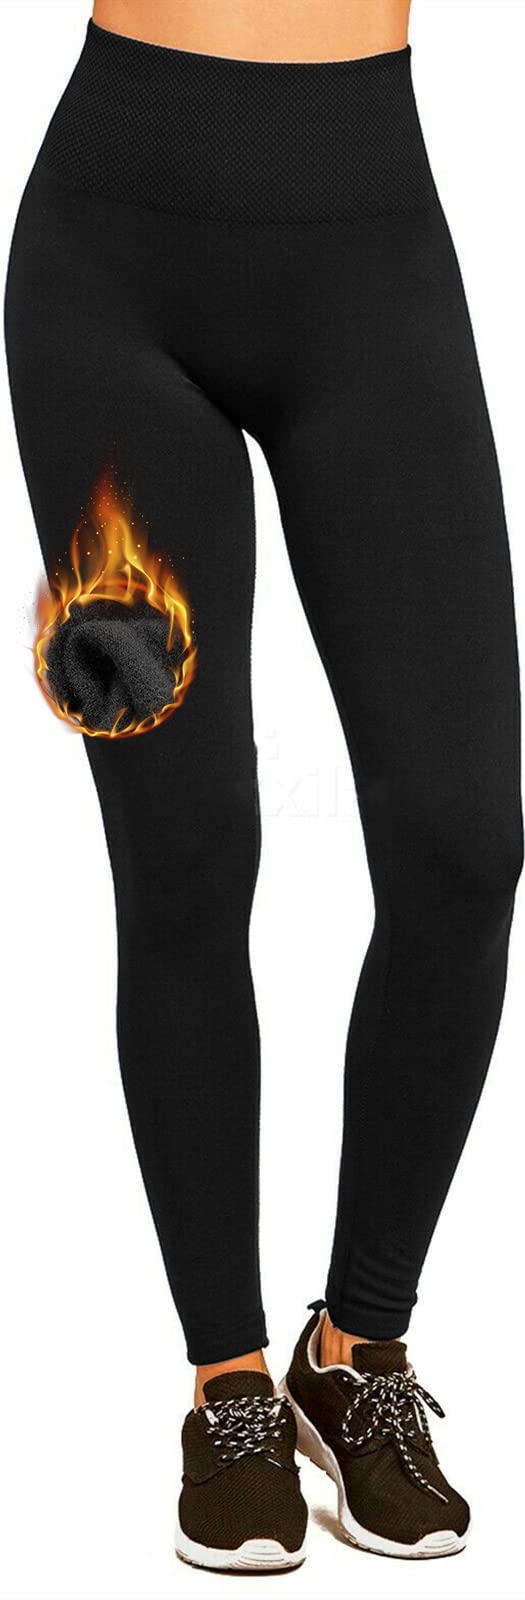  Fleece Lined Leggings Women Thermal Underwear Bottoms Tights  Warm Stretch Seamless Comfortable Soft Classic Cold Weather Black : Sports  & Outdoors